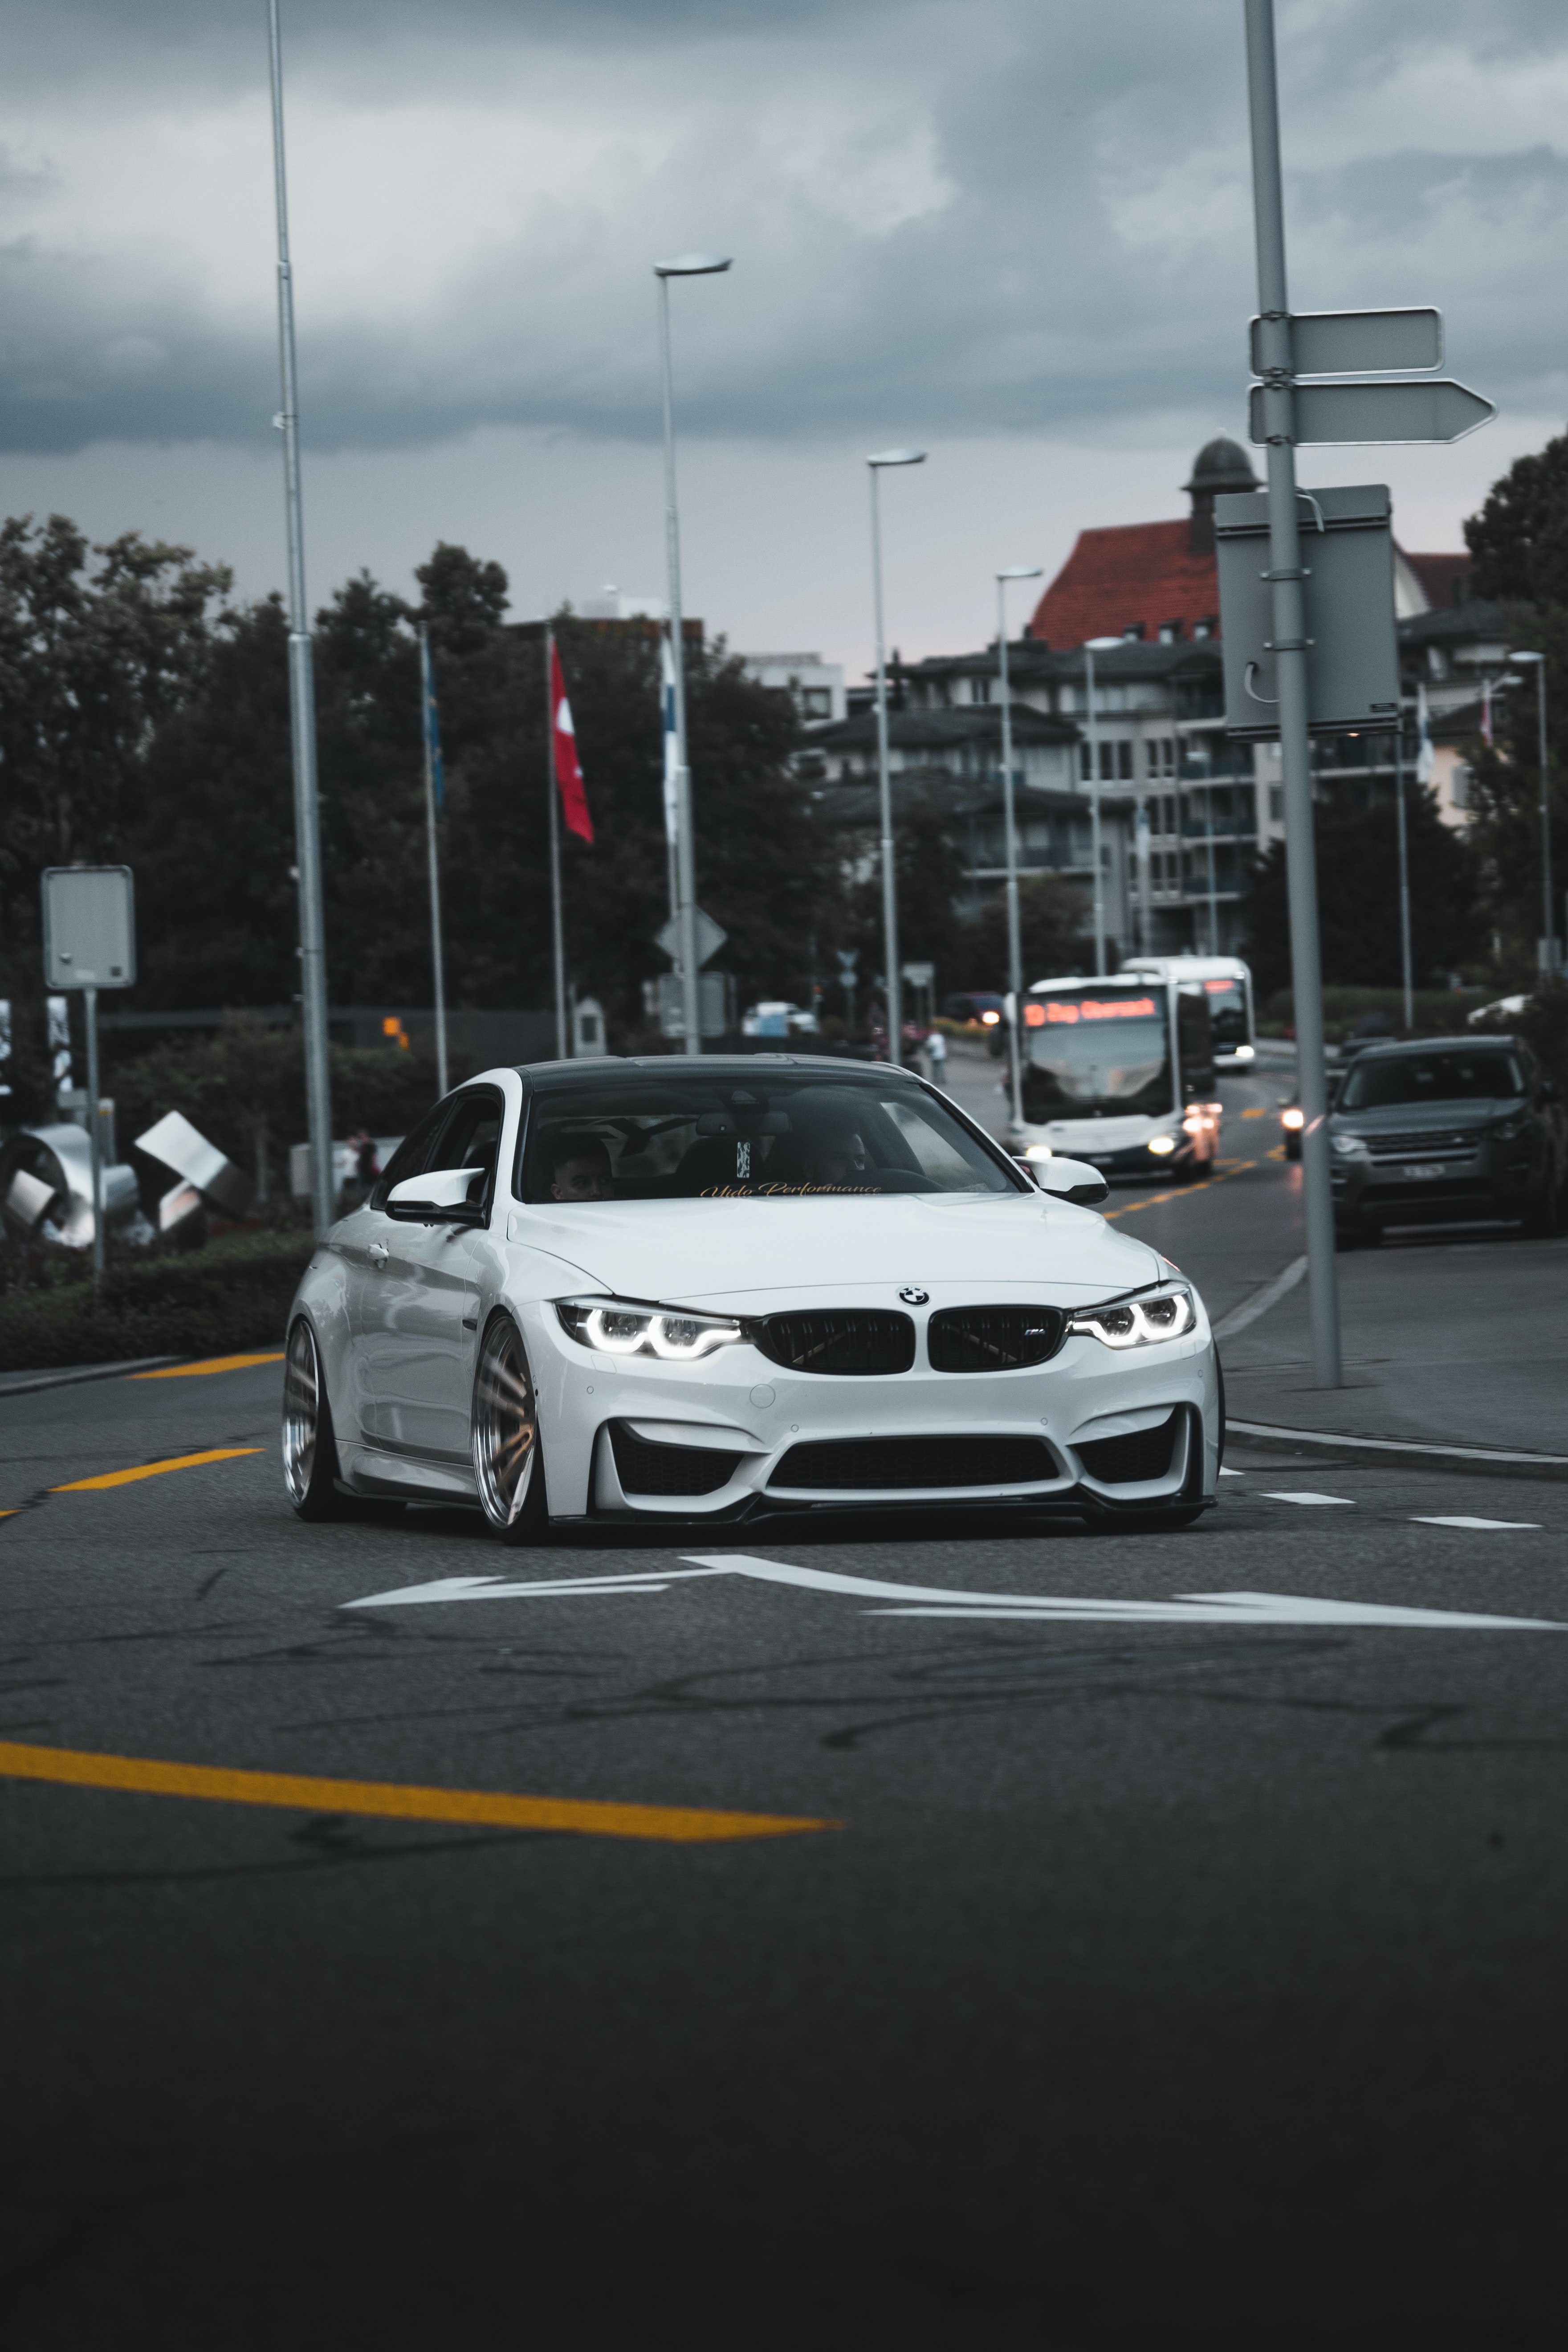 vertical wallpaper bmw, cars, sports car, front view, sports, road, car, bmw 3 series m